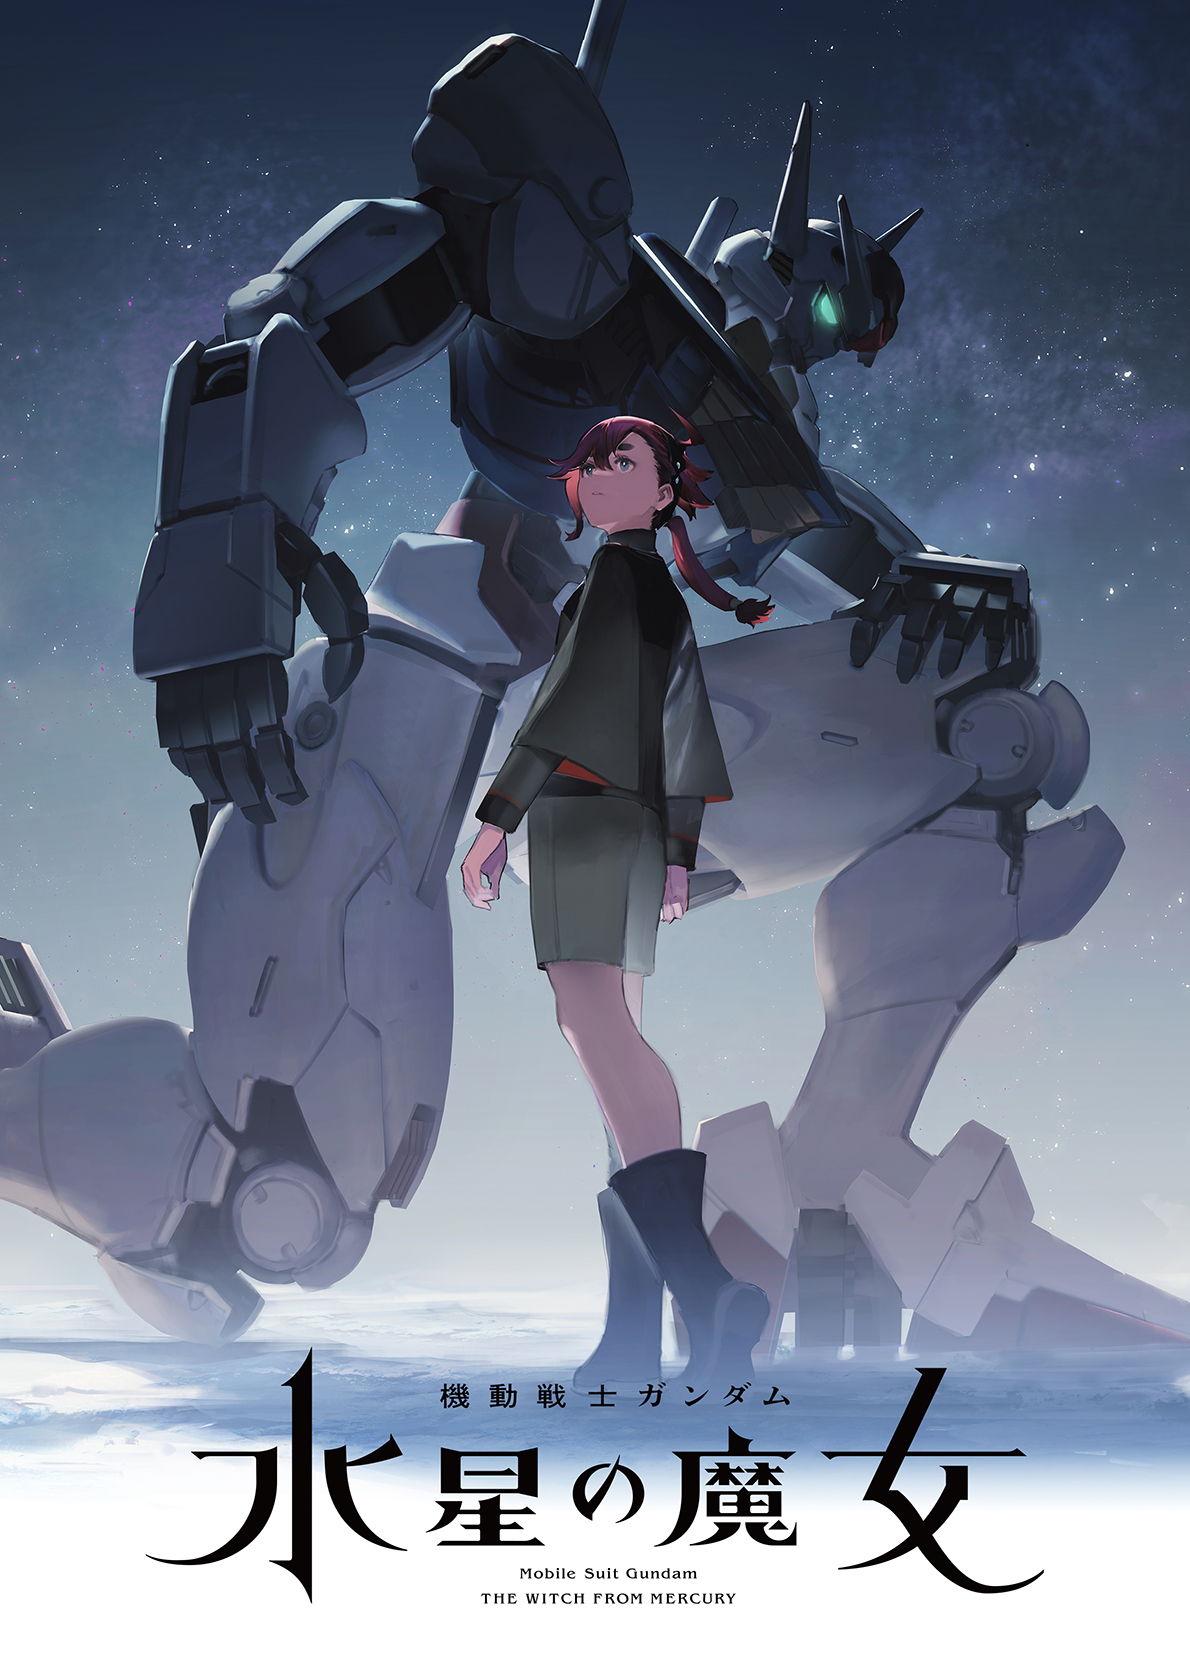 Mobile Suit Gundam The Witch From Mercury Anime Review  by Patrick Lindo   Jul 2023  Medium